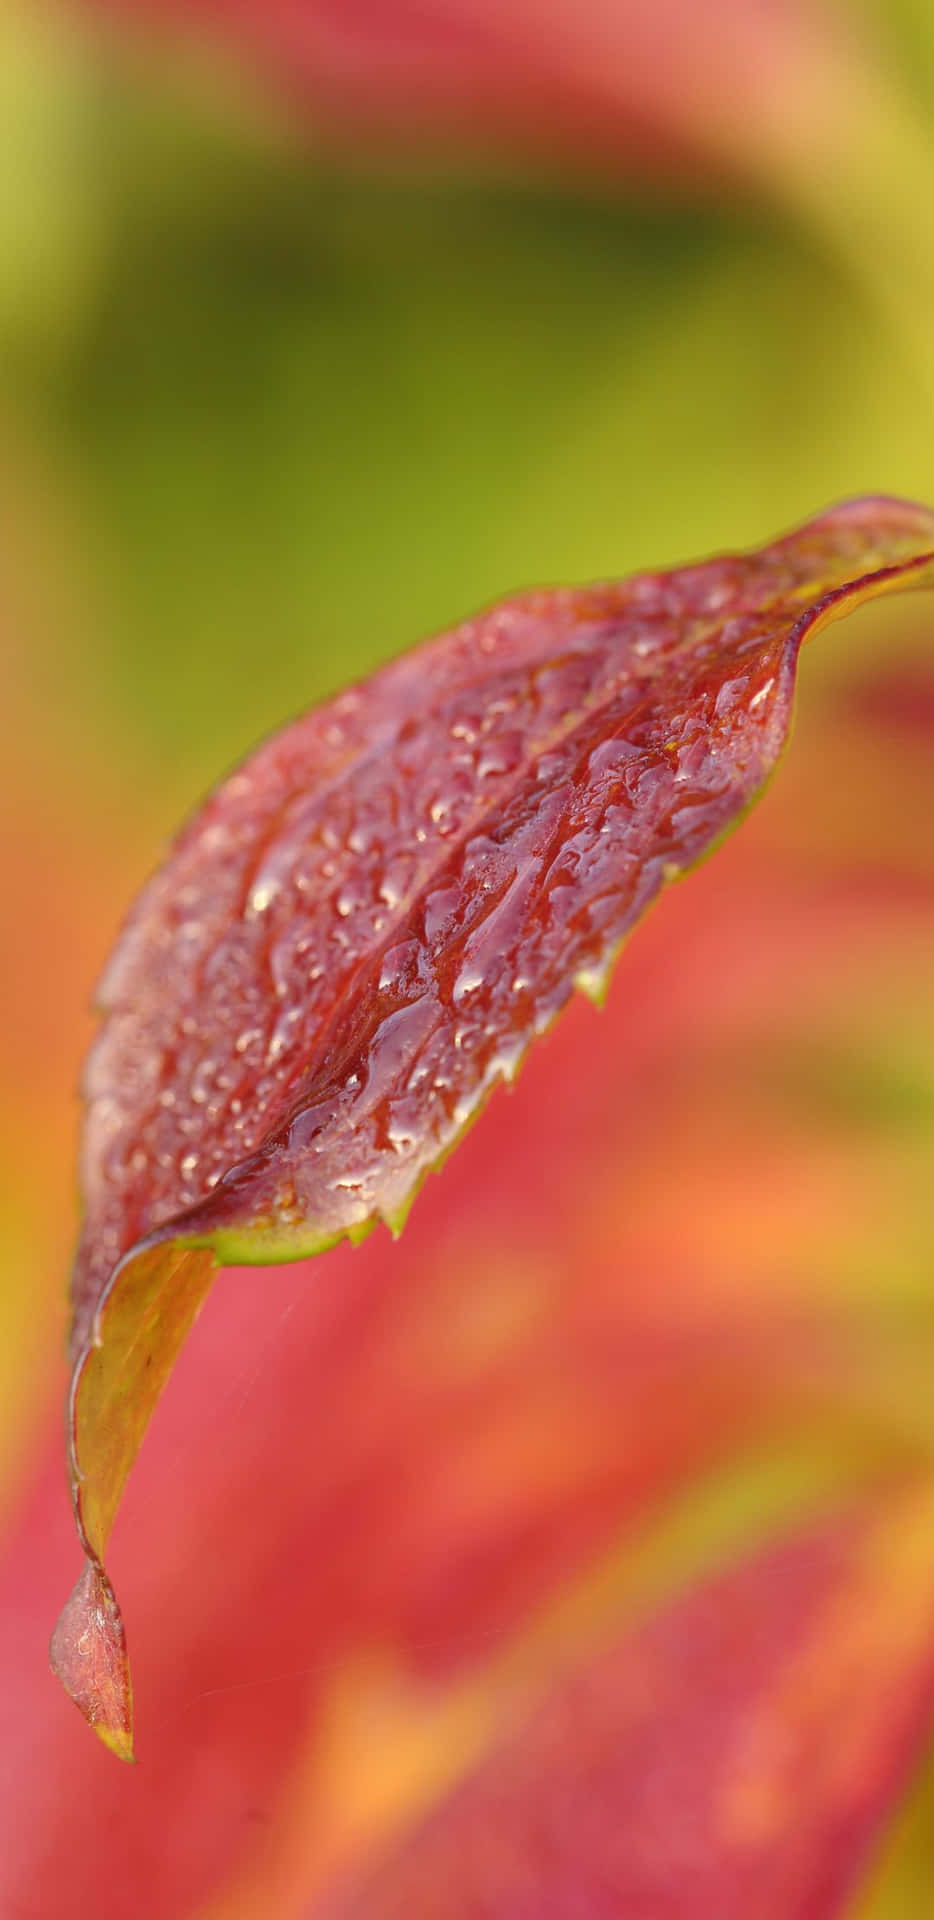 A Leaf With Water Droplets Wallpaper